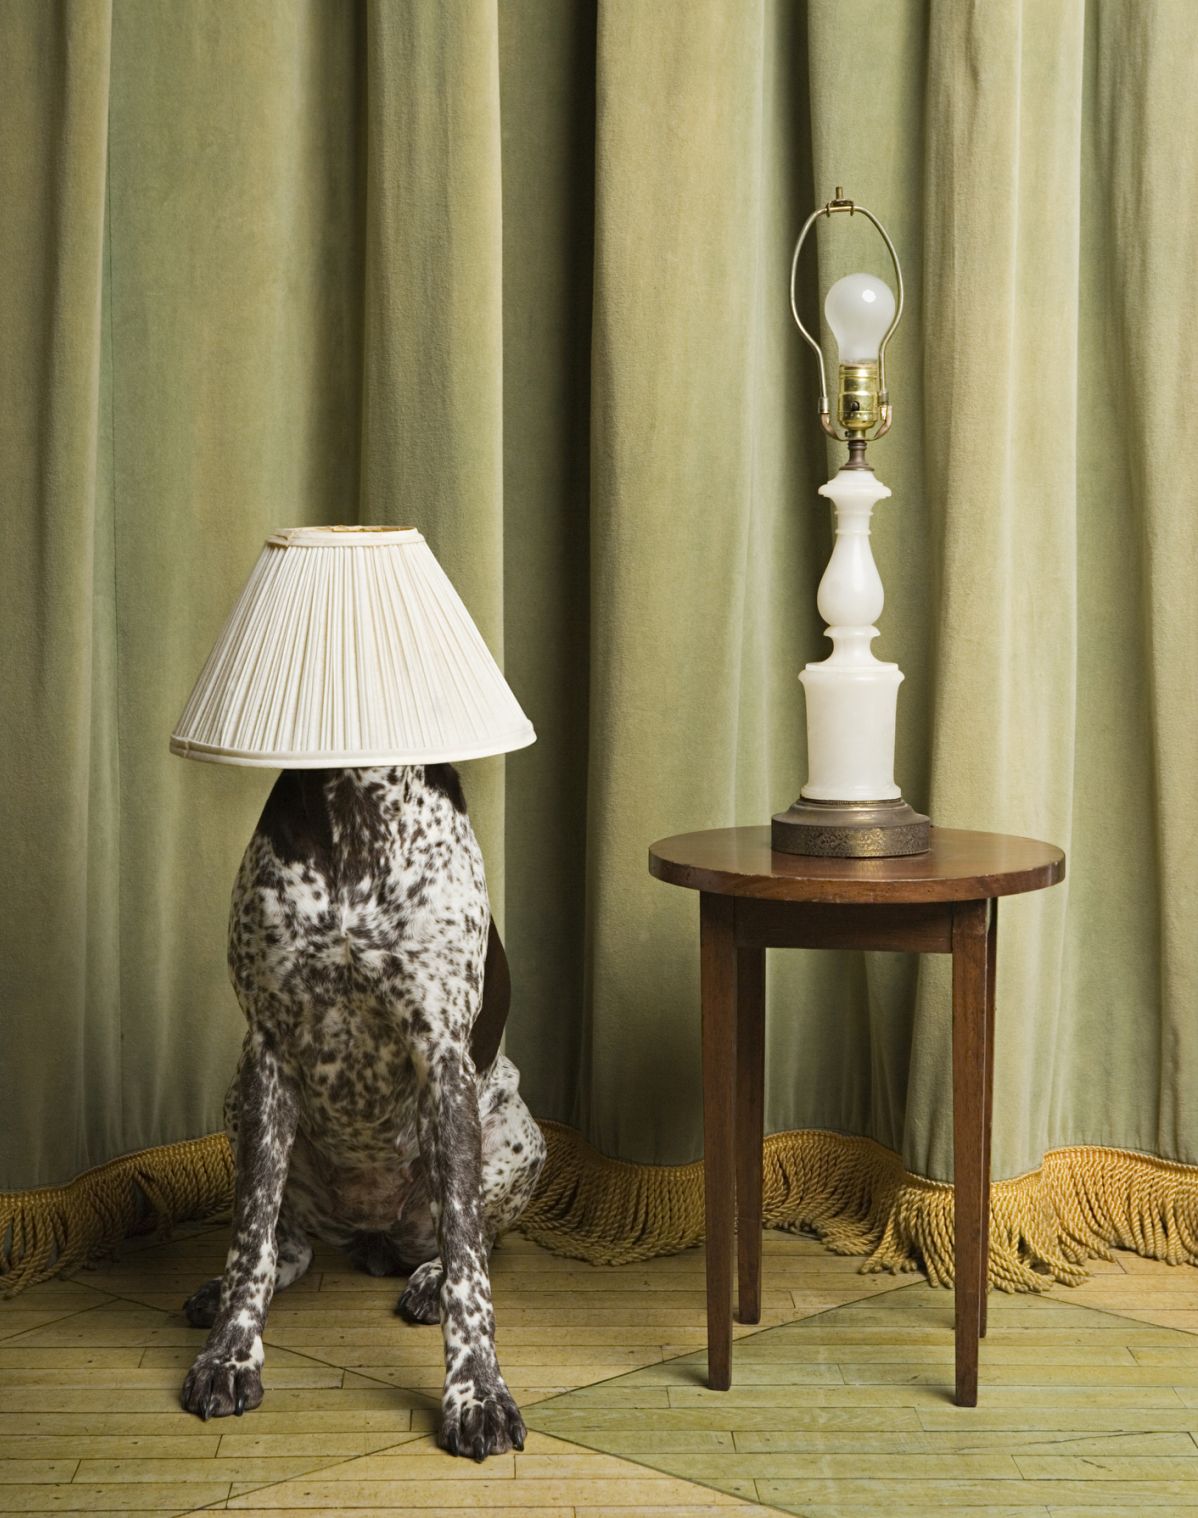 Dog with a lampshade on its head. Bild: © istock.com / Image Source